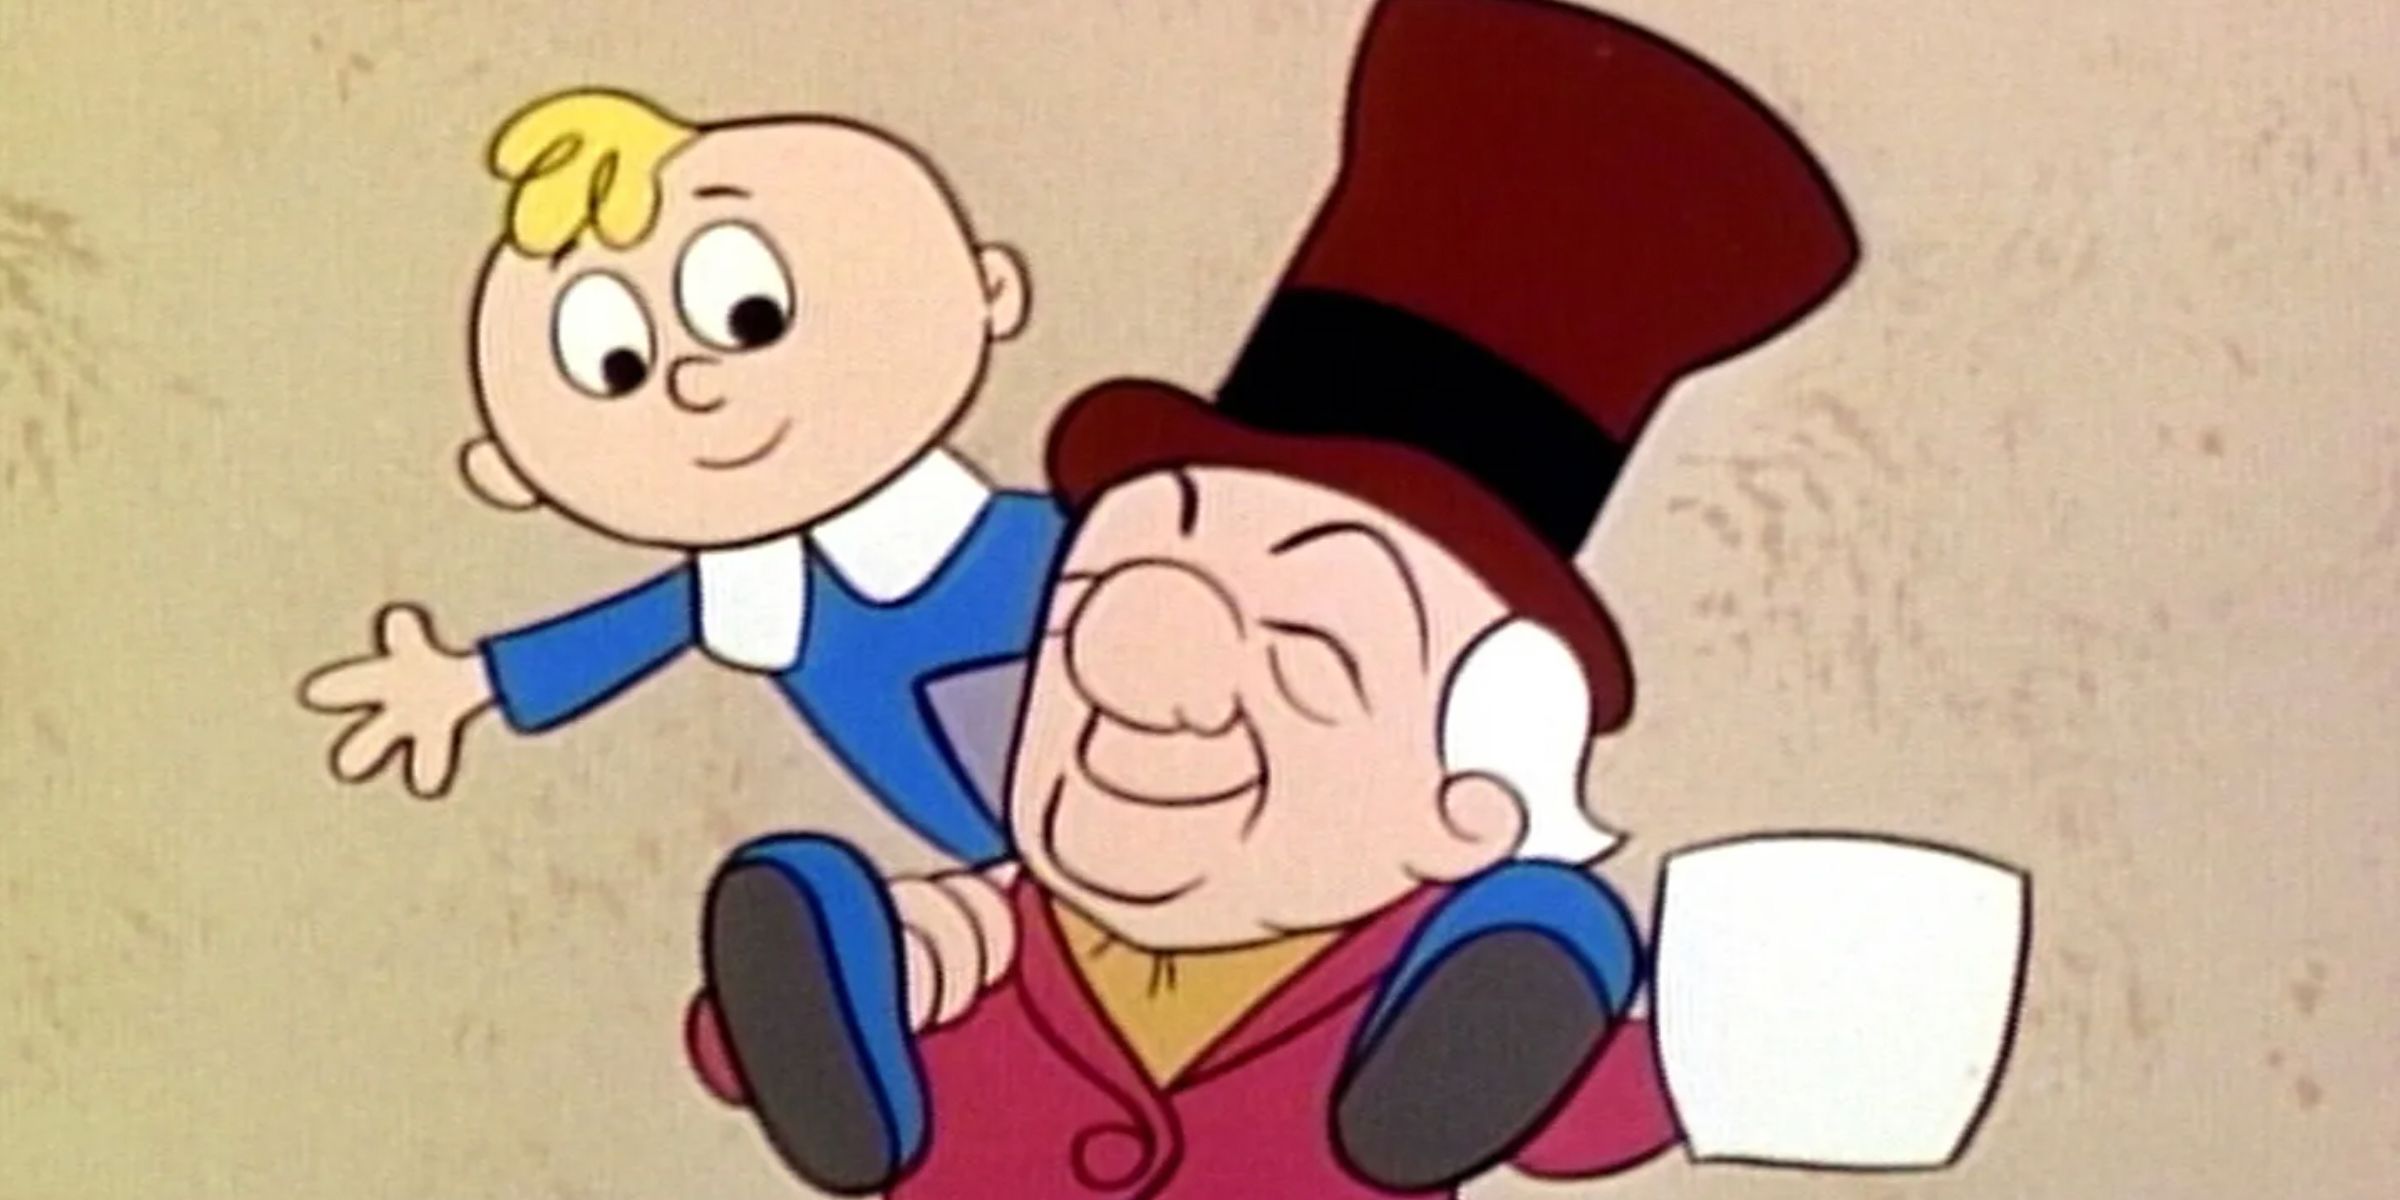 Mr. Magoo holds a small child on his shoulders in Mr. Magoo's Christmas Carol animated special